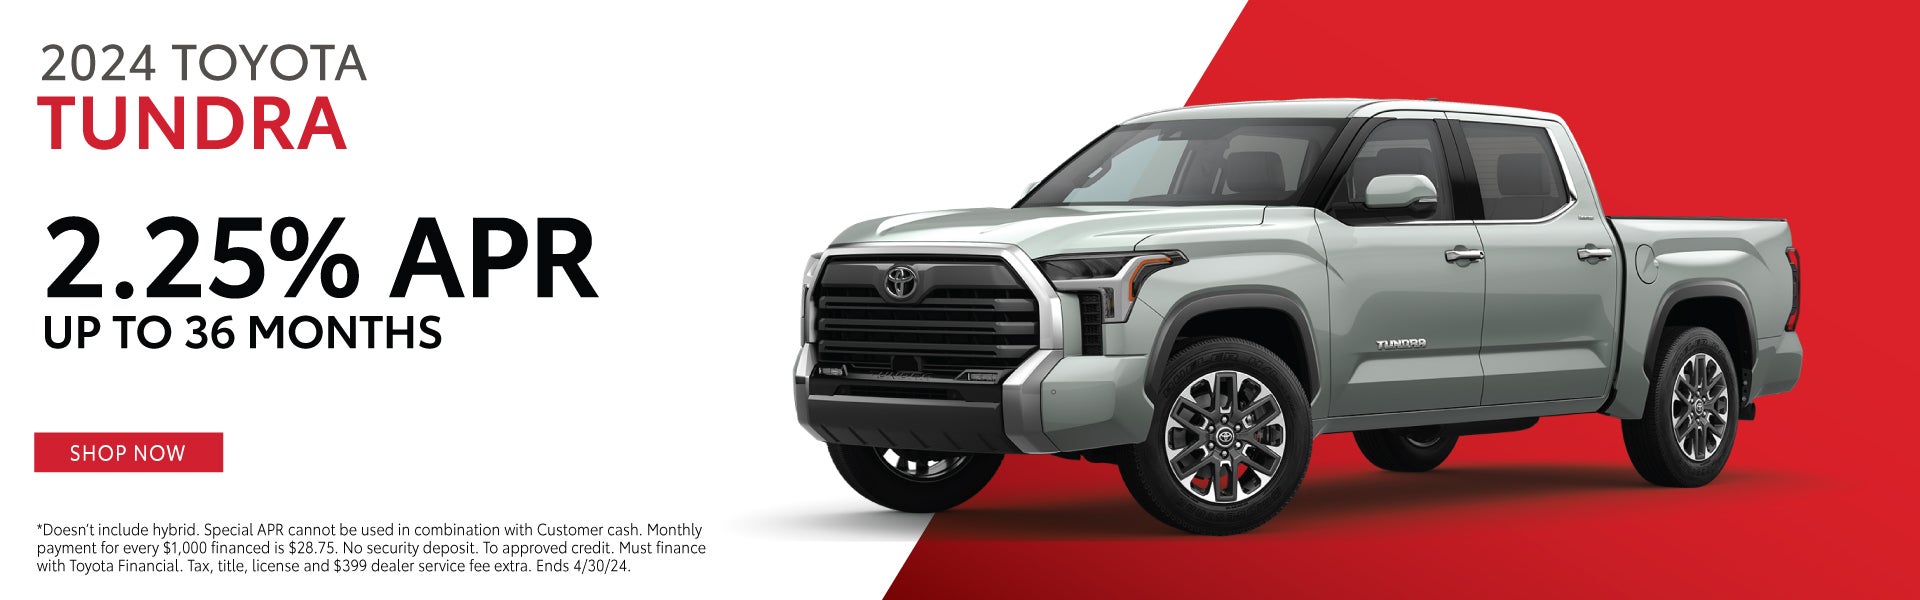 2024 Toyota Tundra. 2.25% APR, up to 36 Months